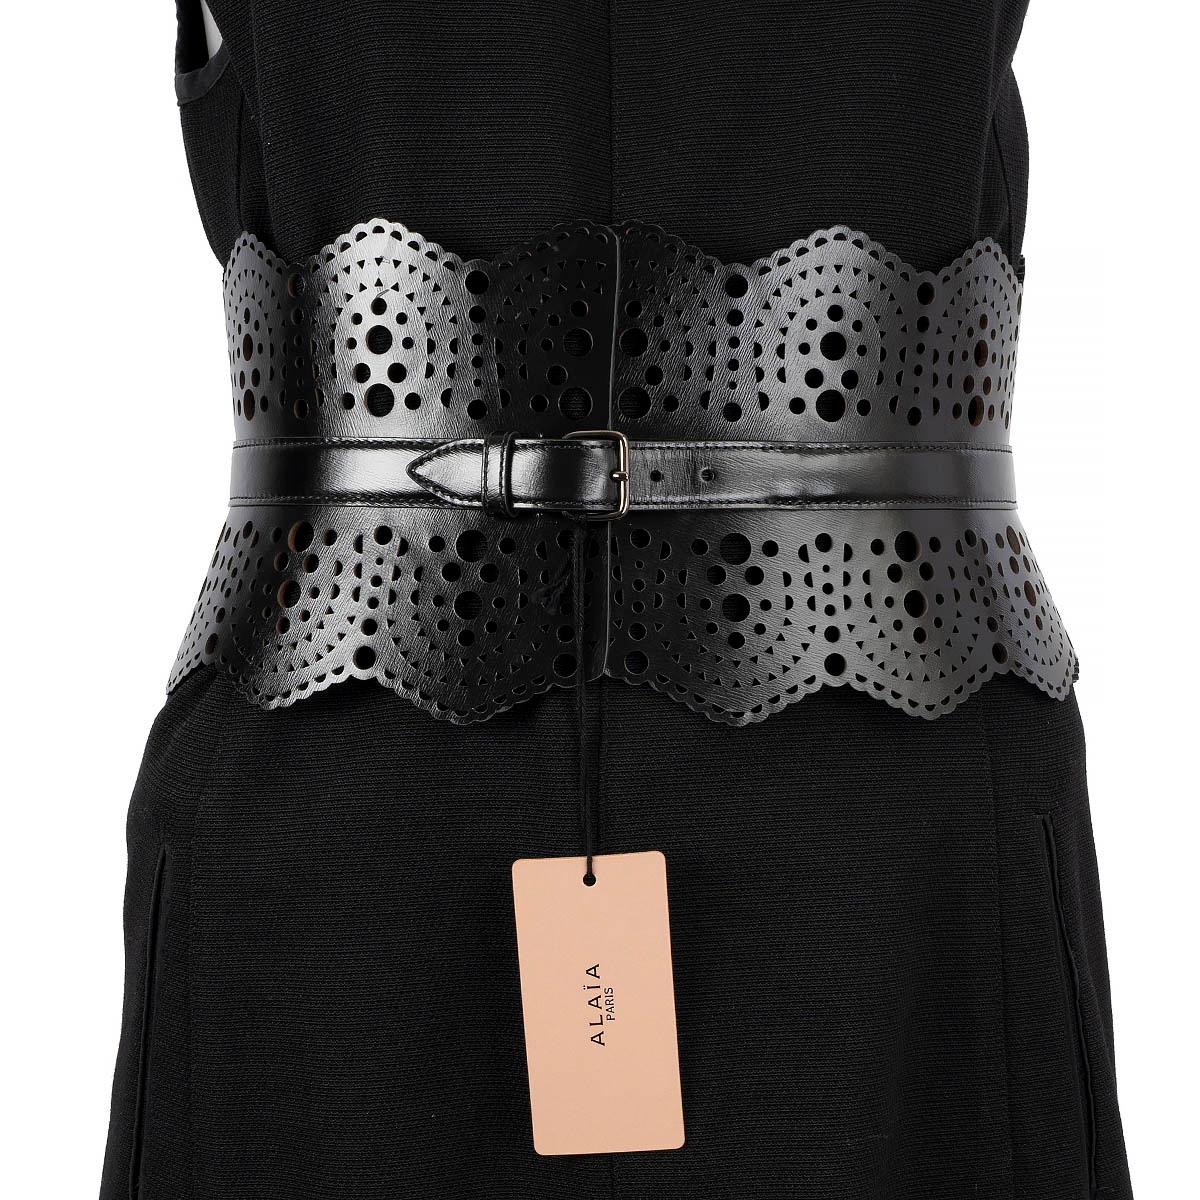 100% authentic Alaïa Bustier 120 corset belt made from smooth black calf leather and its wide strap is enriched with laser-cut details. Brand new with tags. Comes with dust bag and box.

Measurements
Model	AA1C082GCA096
Tag Size	70
Width	15cm